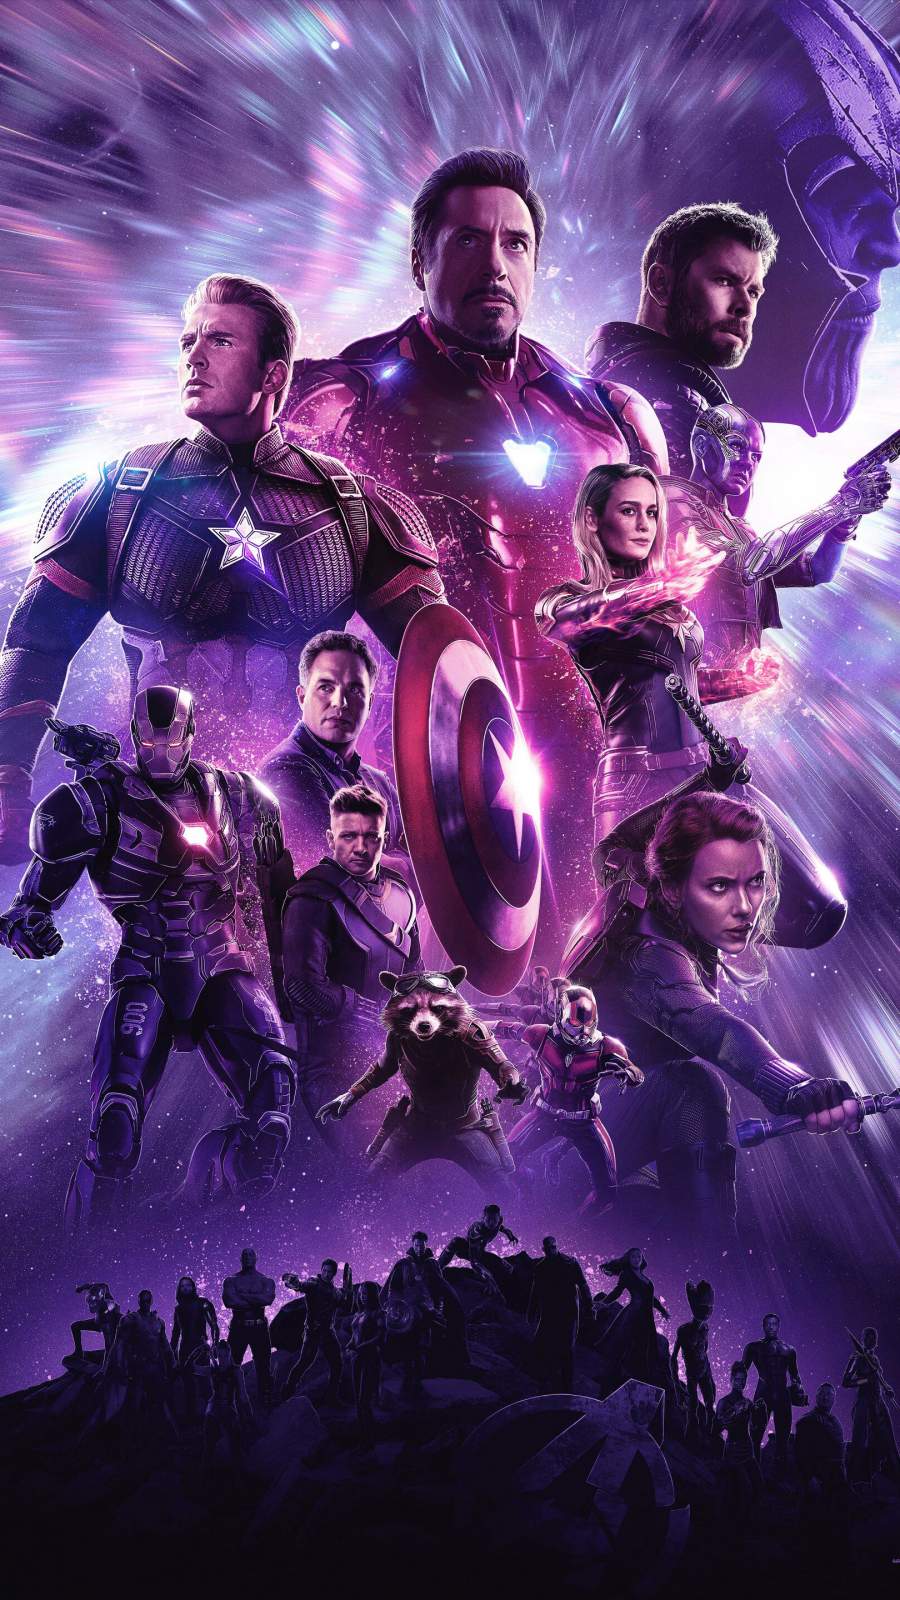 The Avengers Poster IPhone Wallpaper - IPhone Wallpapers : iPhone Wallpapers